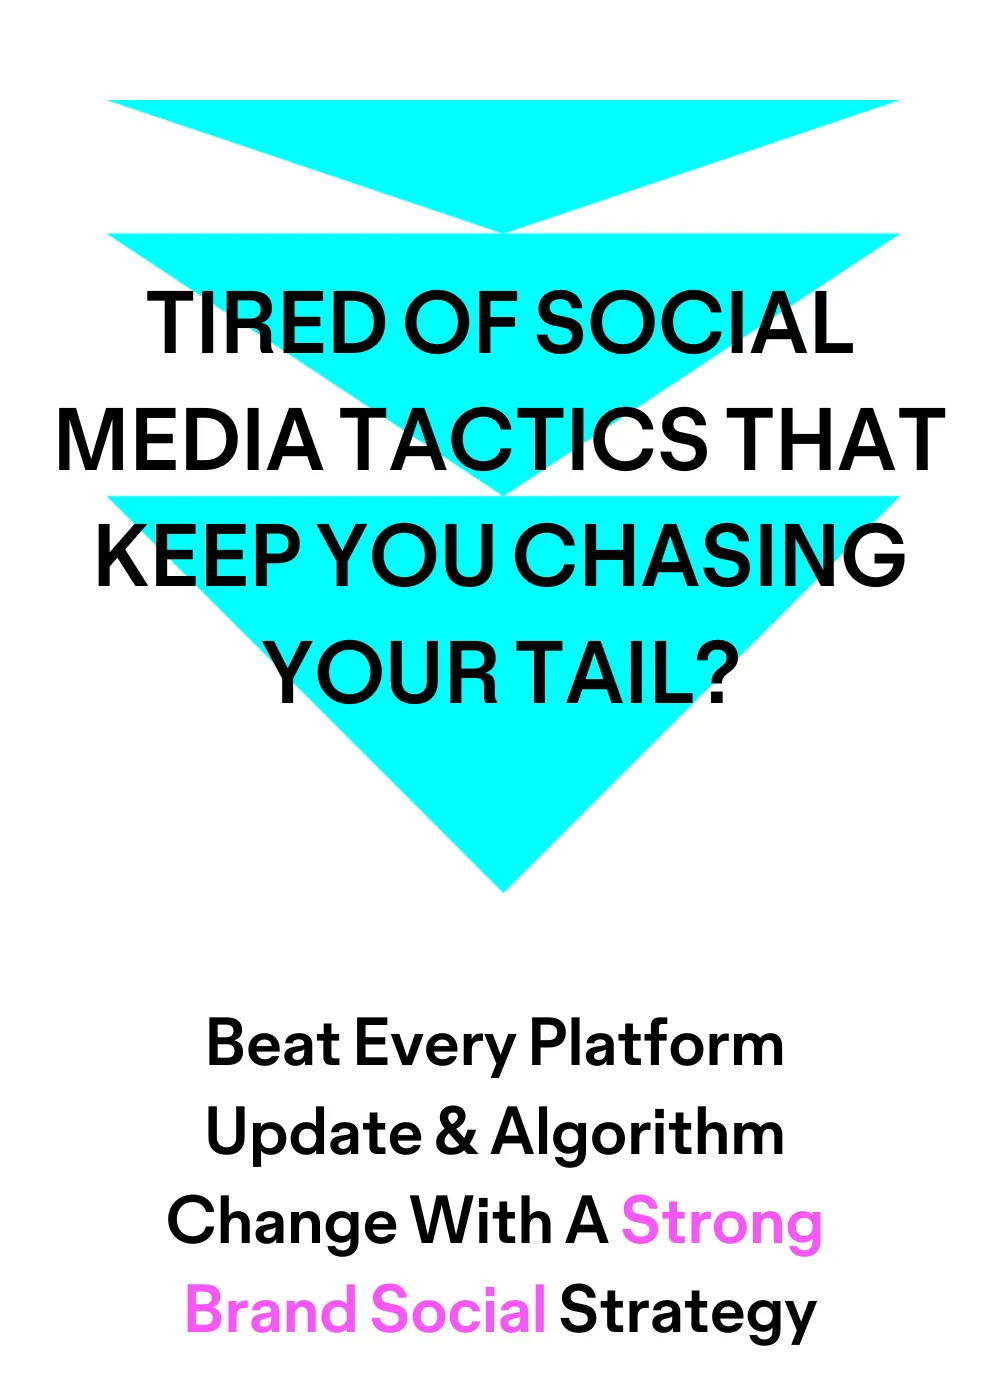 Tired of social media tactics that keep you chasing your tail? Beat every platform update and algorithm change with a strong brand social strategy -- the industry's #1 guide to high performance social media for leaders who kinda hate social media.